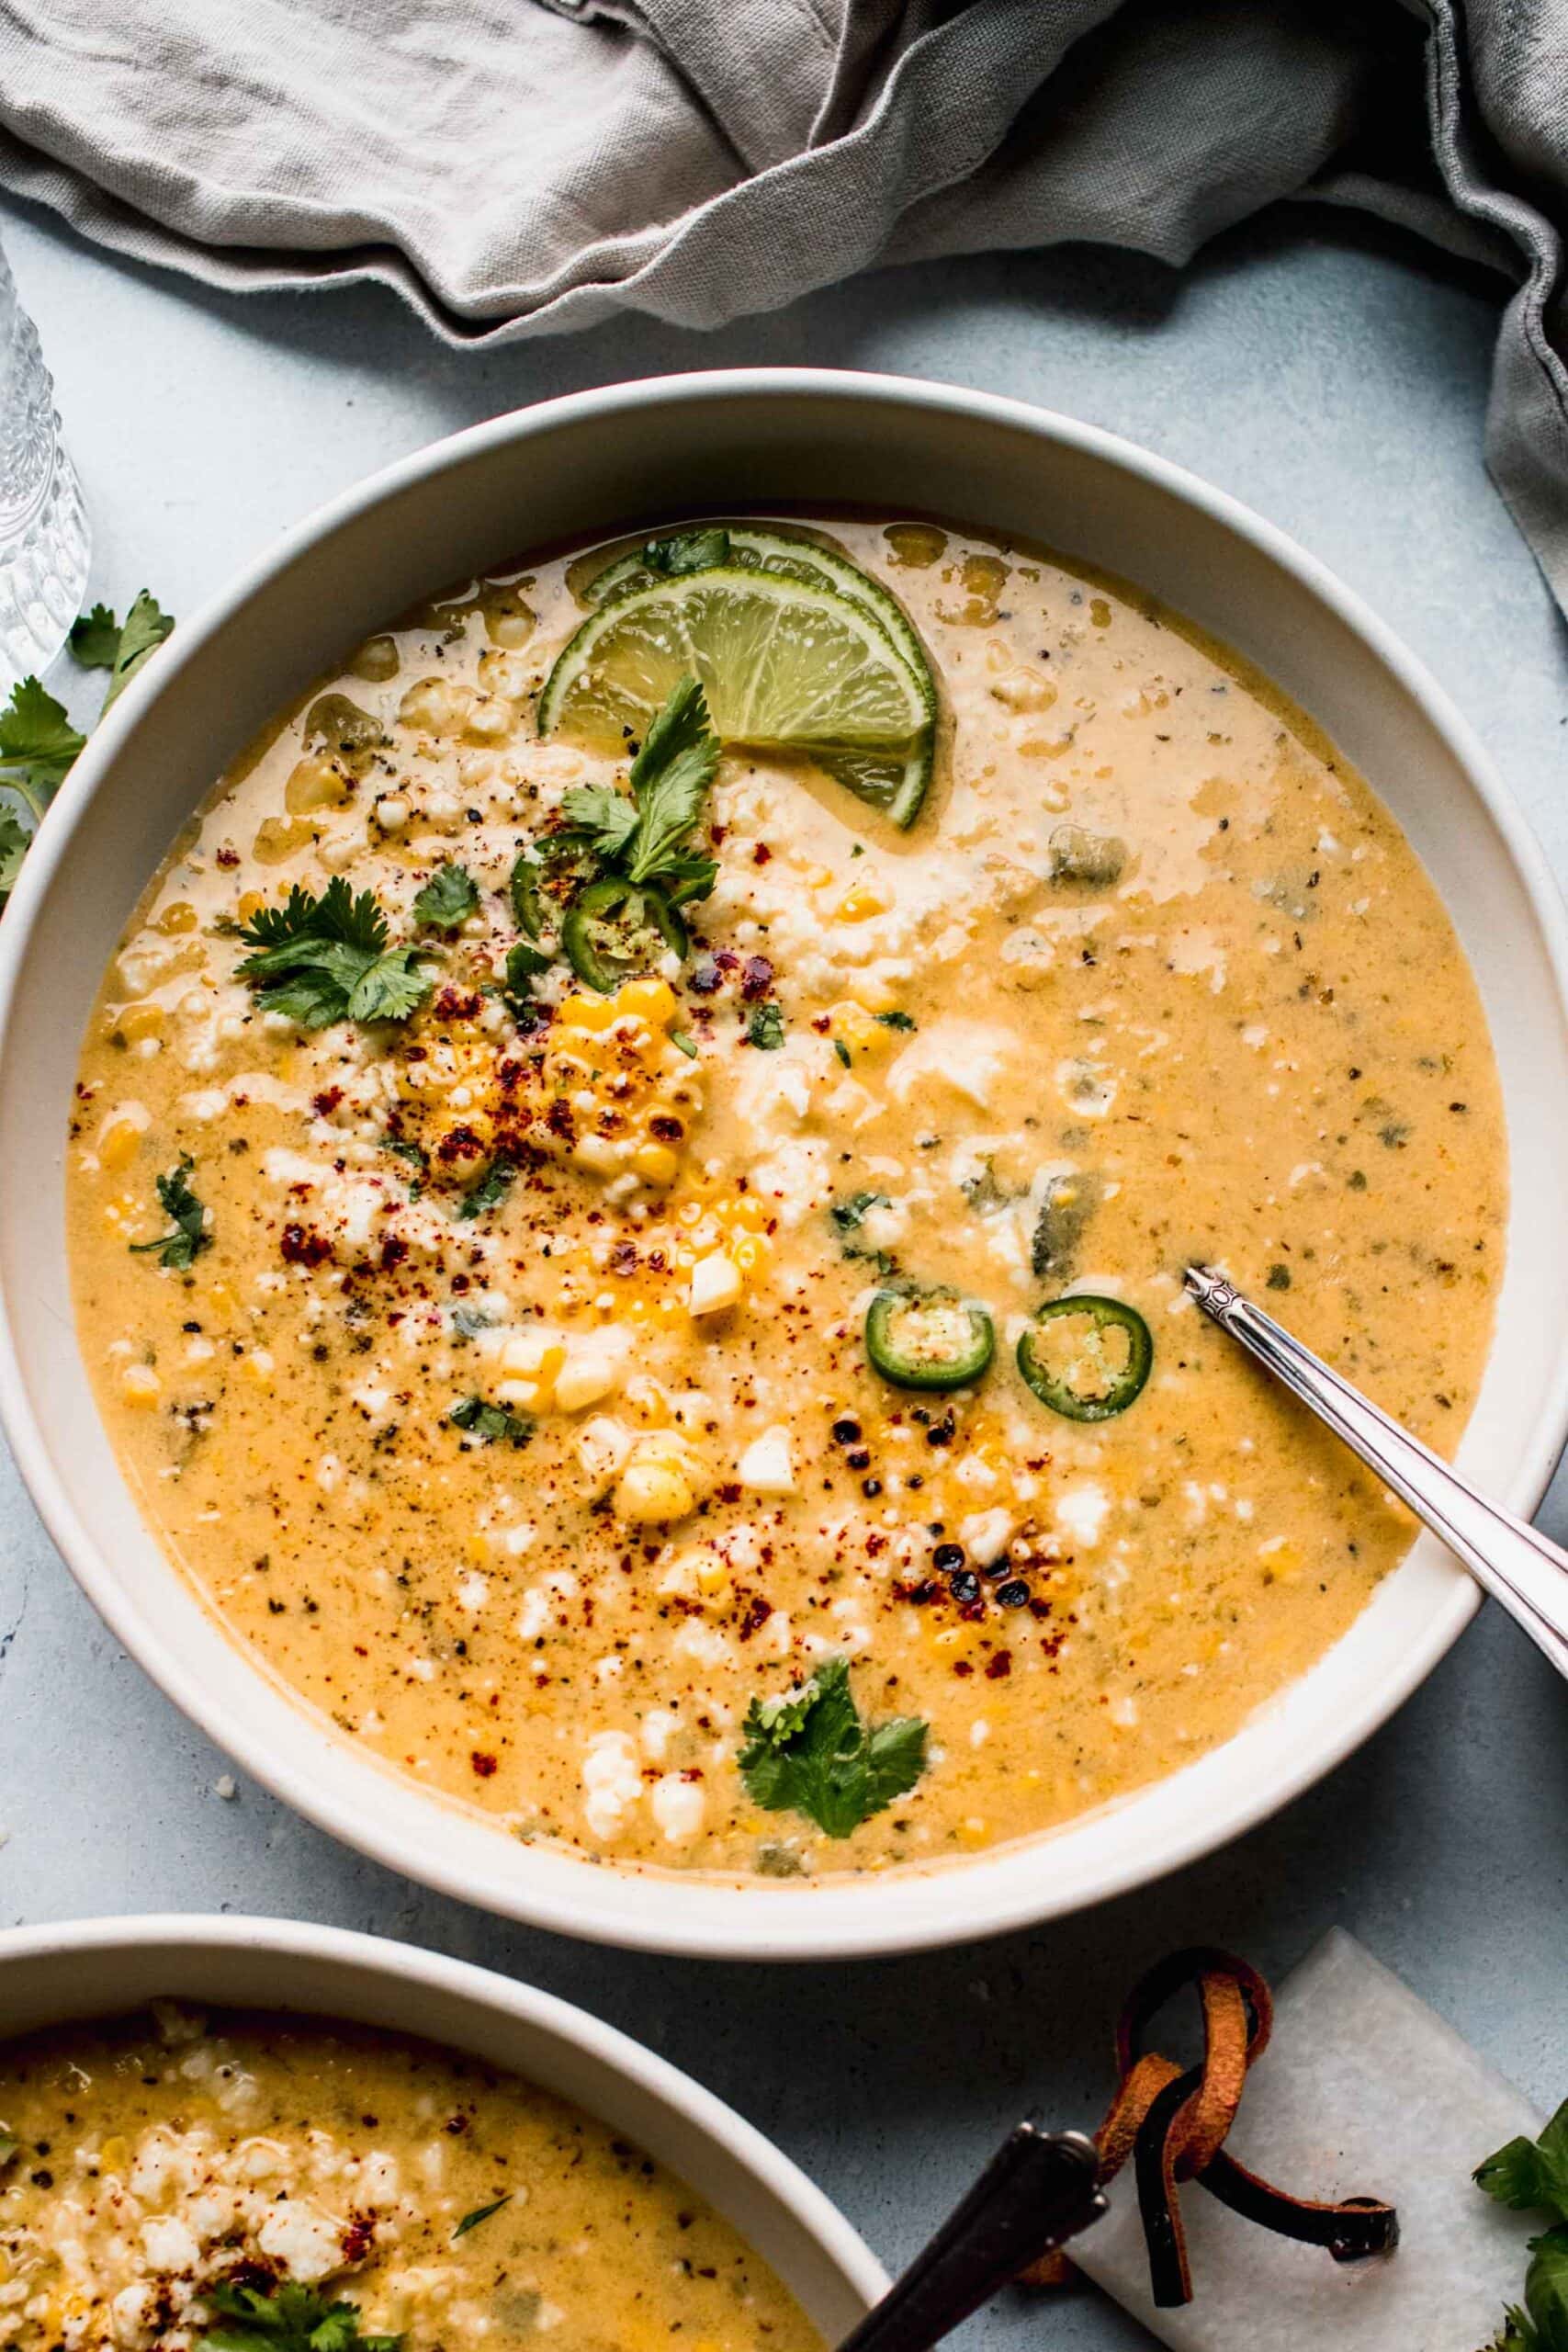 Bowl of Mexican Corn Soup garnished with cliantro, chile powder and lime wedges.